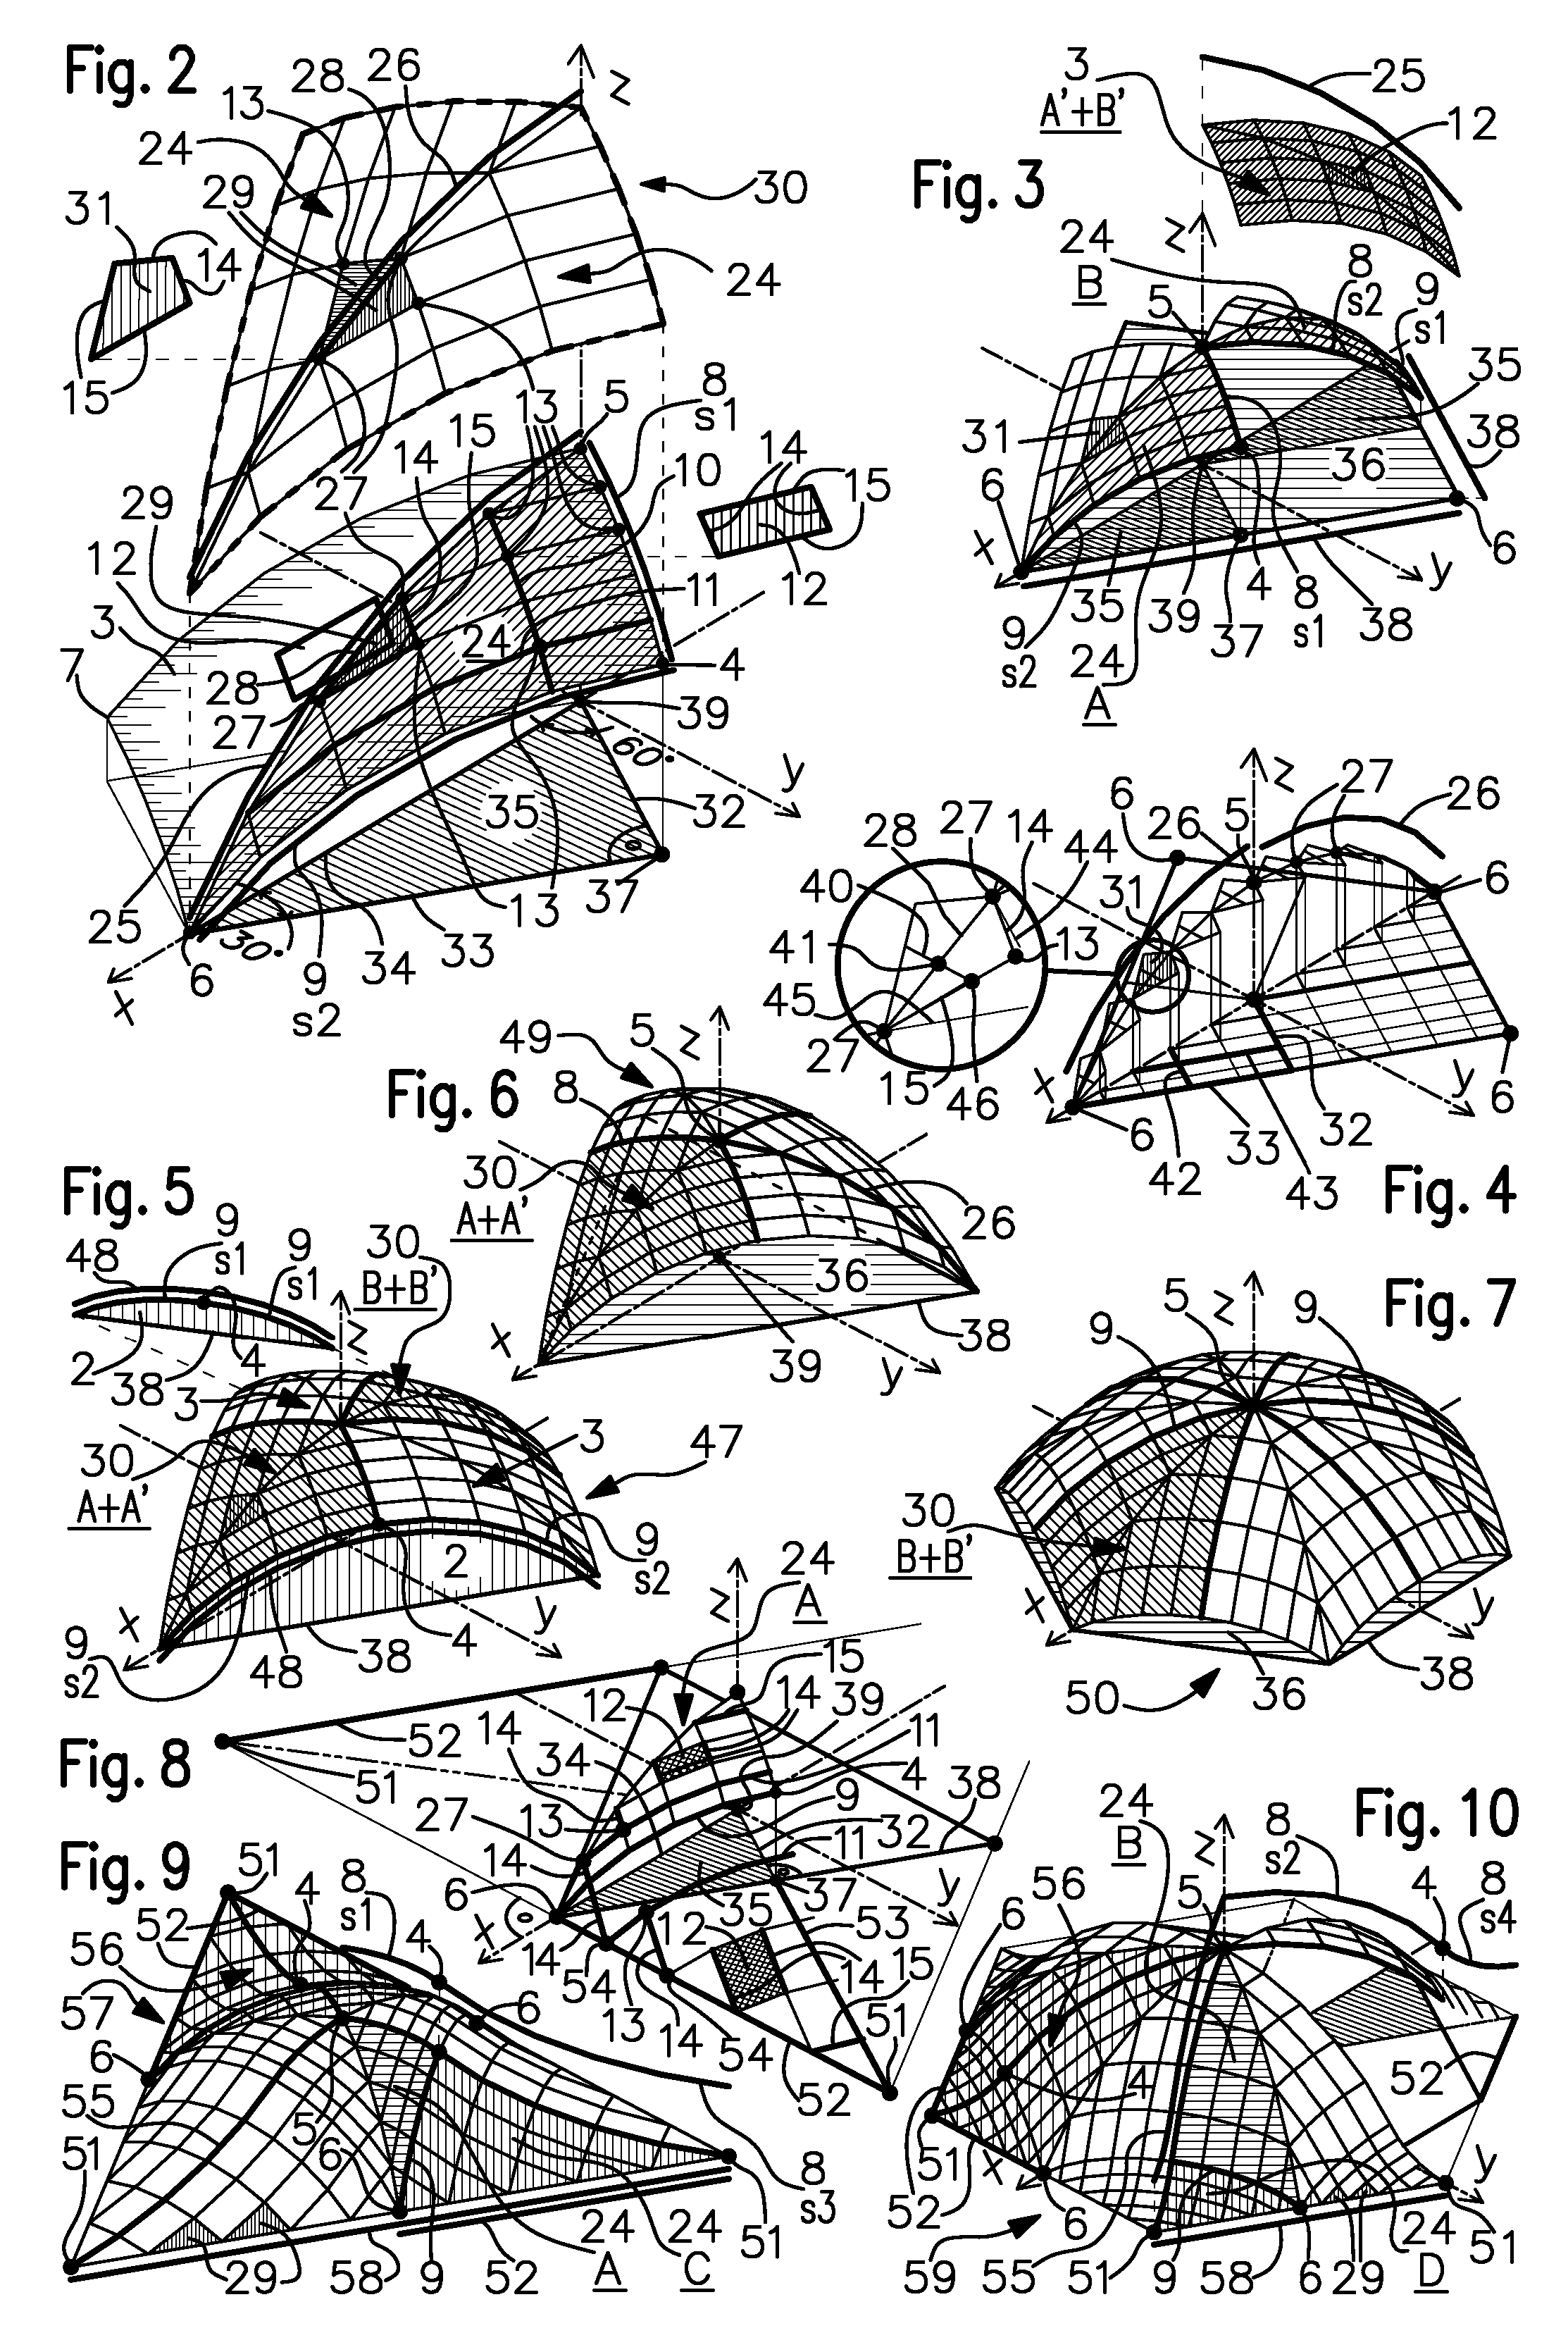 Double-curved shell